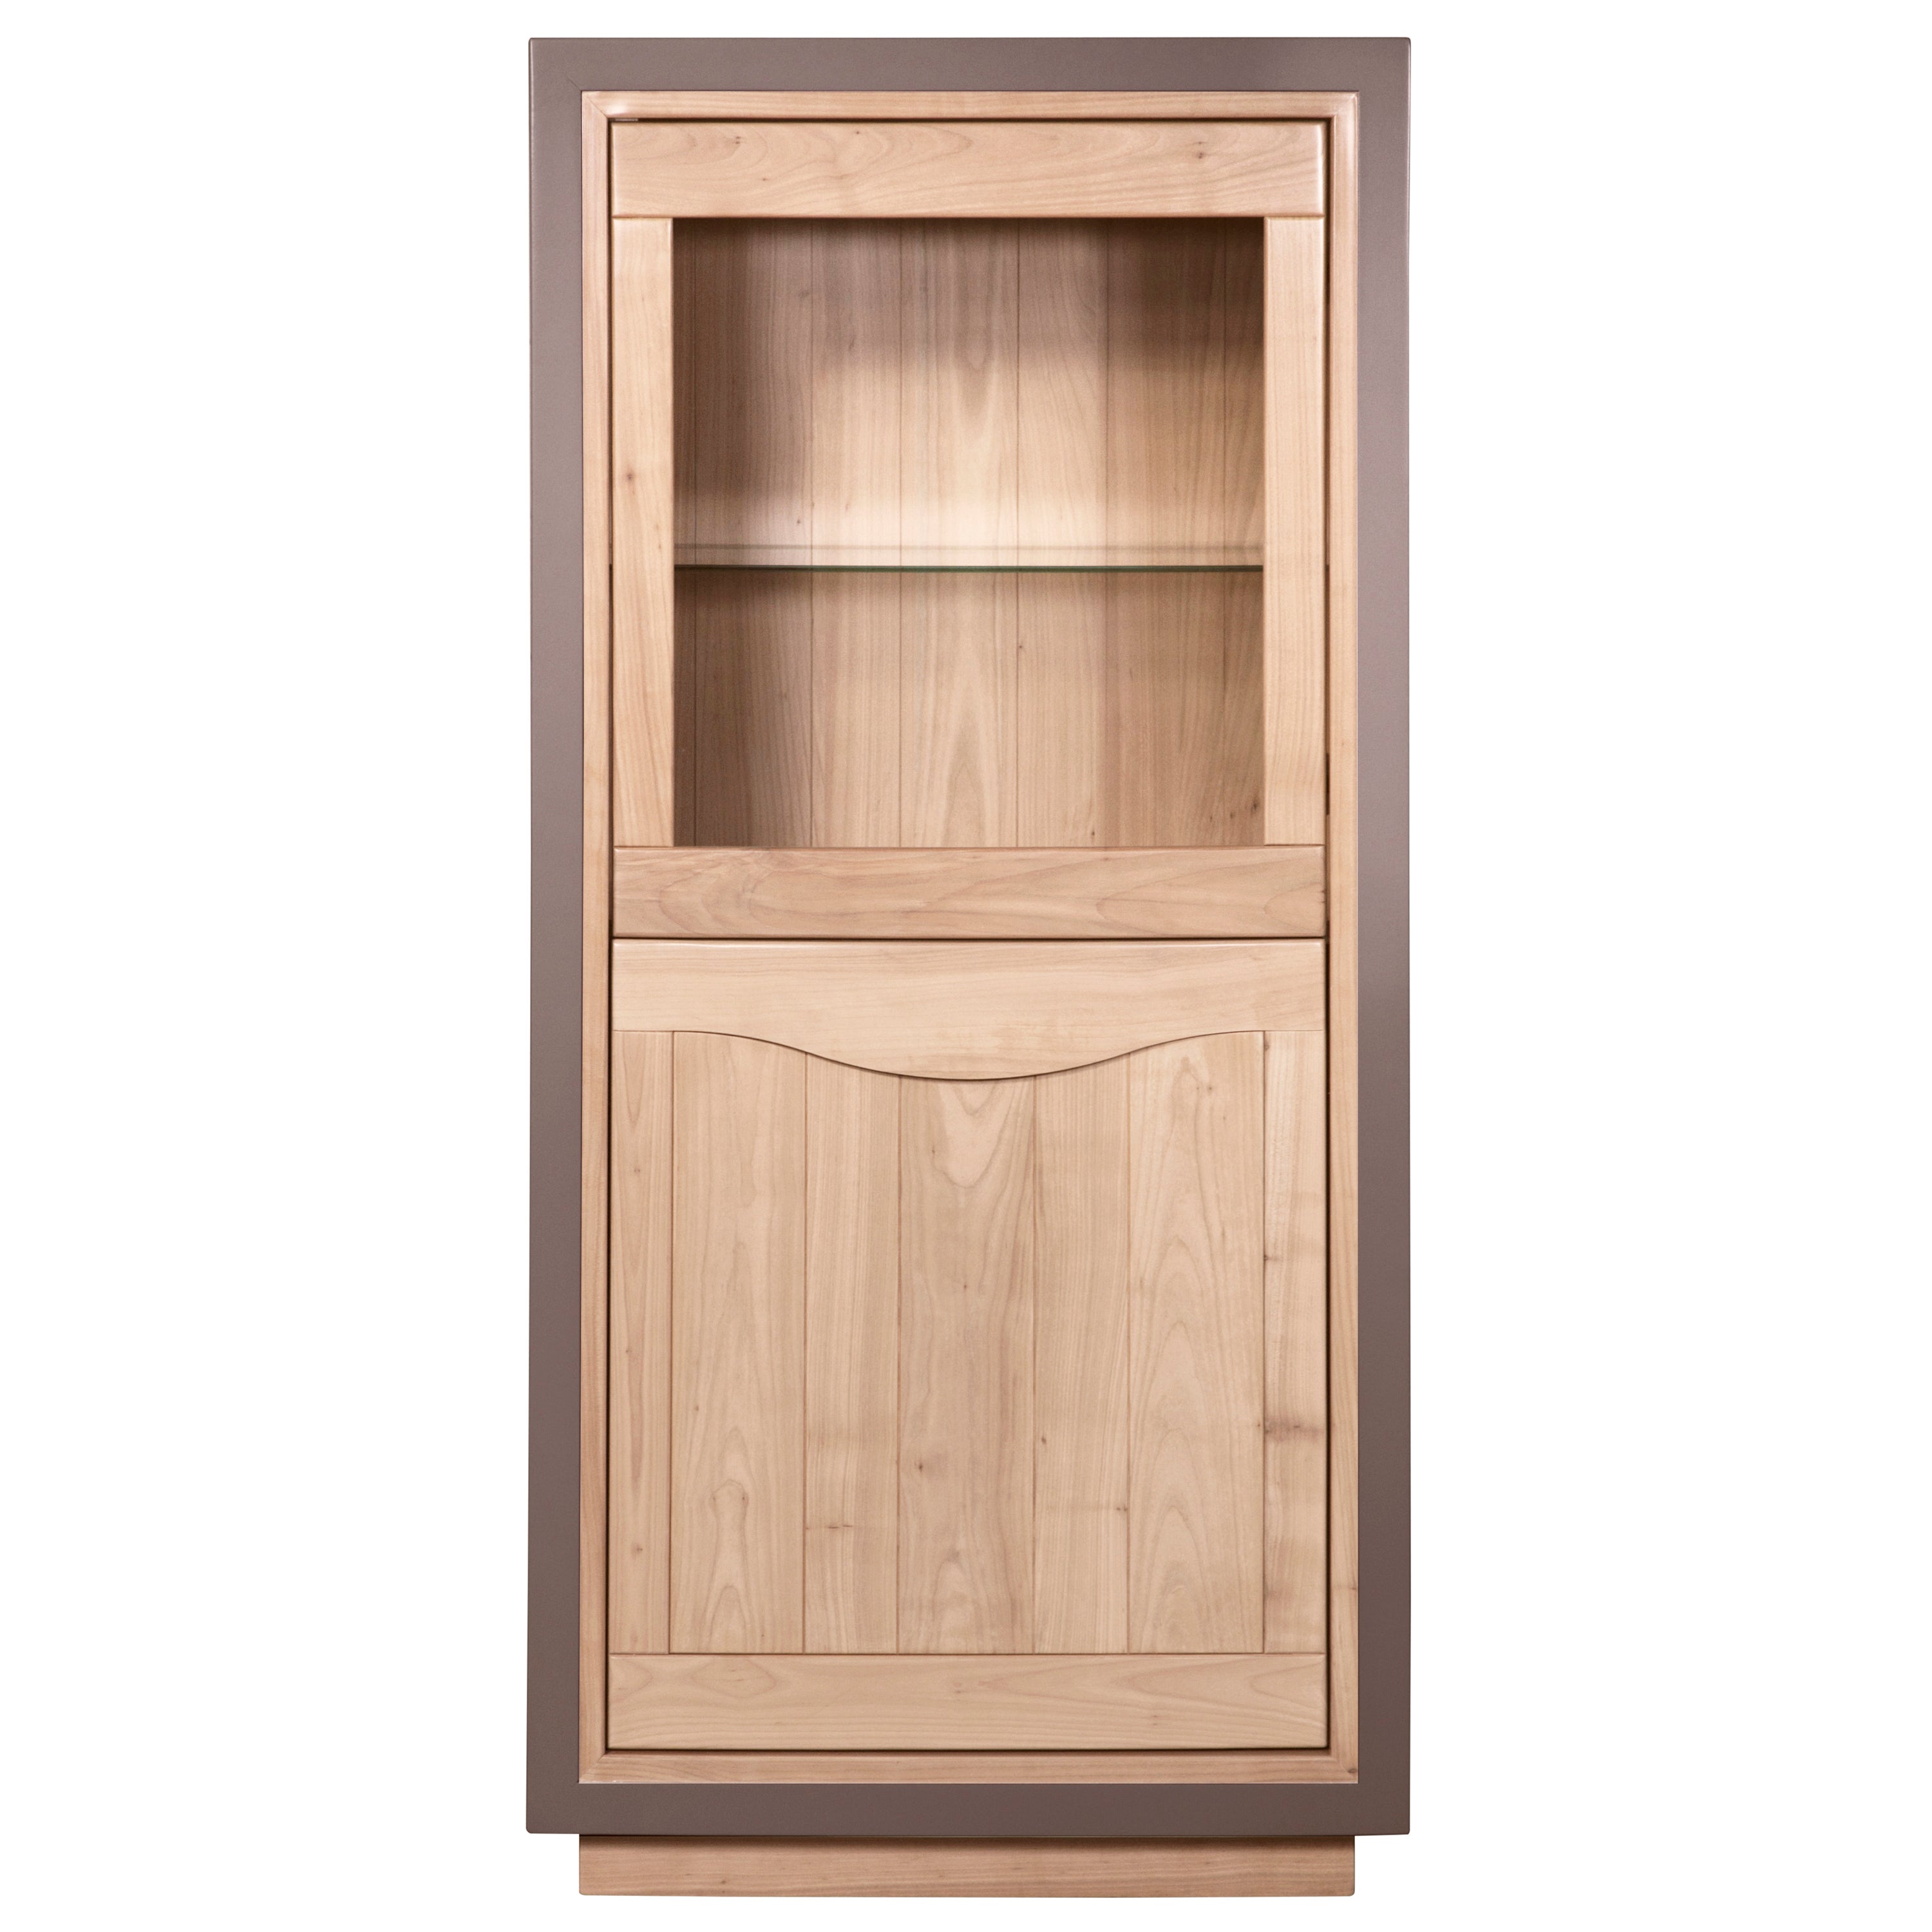 2-Door Vitrine, Display Cabinet in Natural Cherry, 100% Made in France For  Sale at 1stDibs | vipfurnitureonline.fr vitrine en verre,  vipfurnitureonline.pt, vipfurnitureonline.fr porte en bois